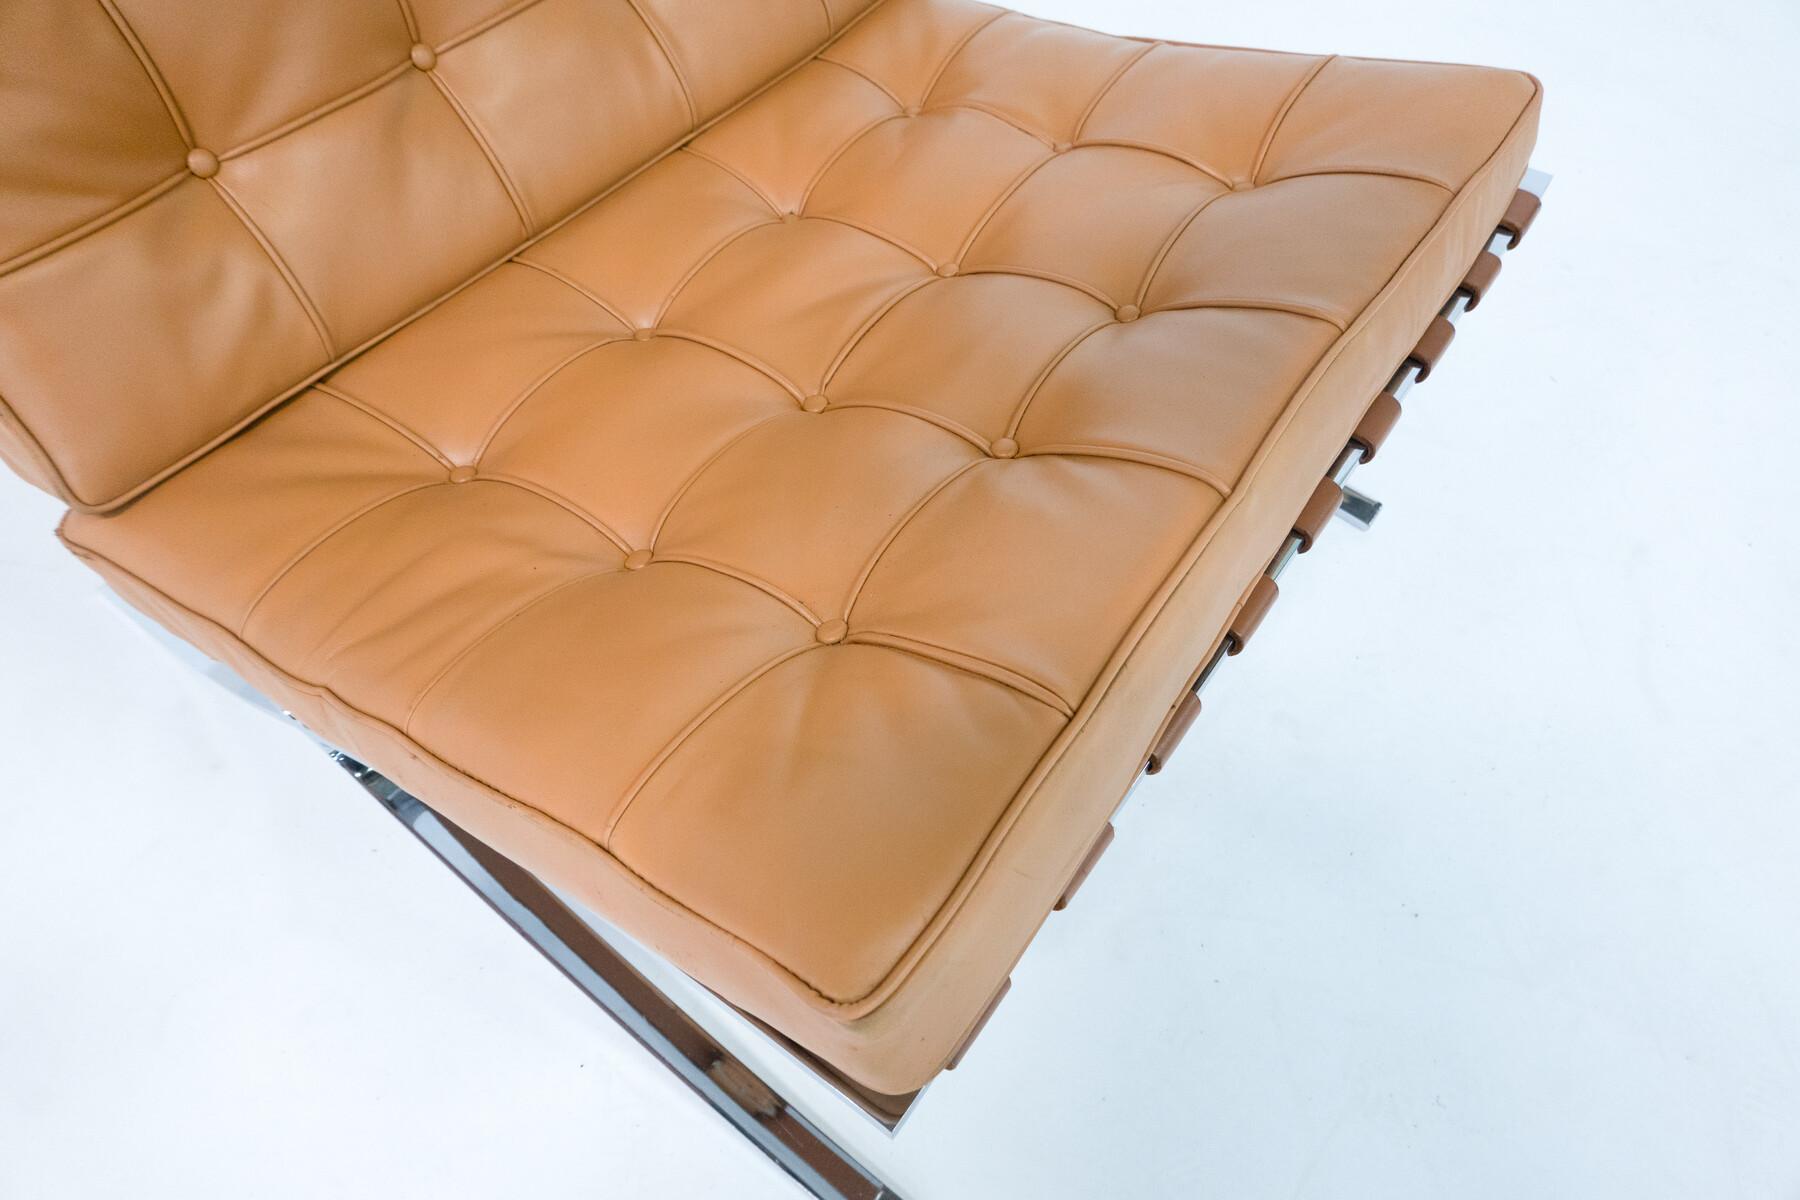 German Pair of Cognac Leather Barcelona Chairs by Mies Van Der Rohe for Knoll, 1960s For Sale